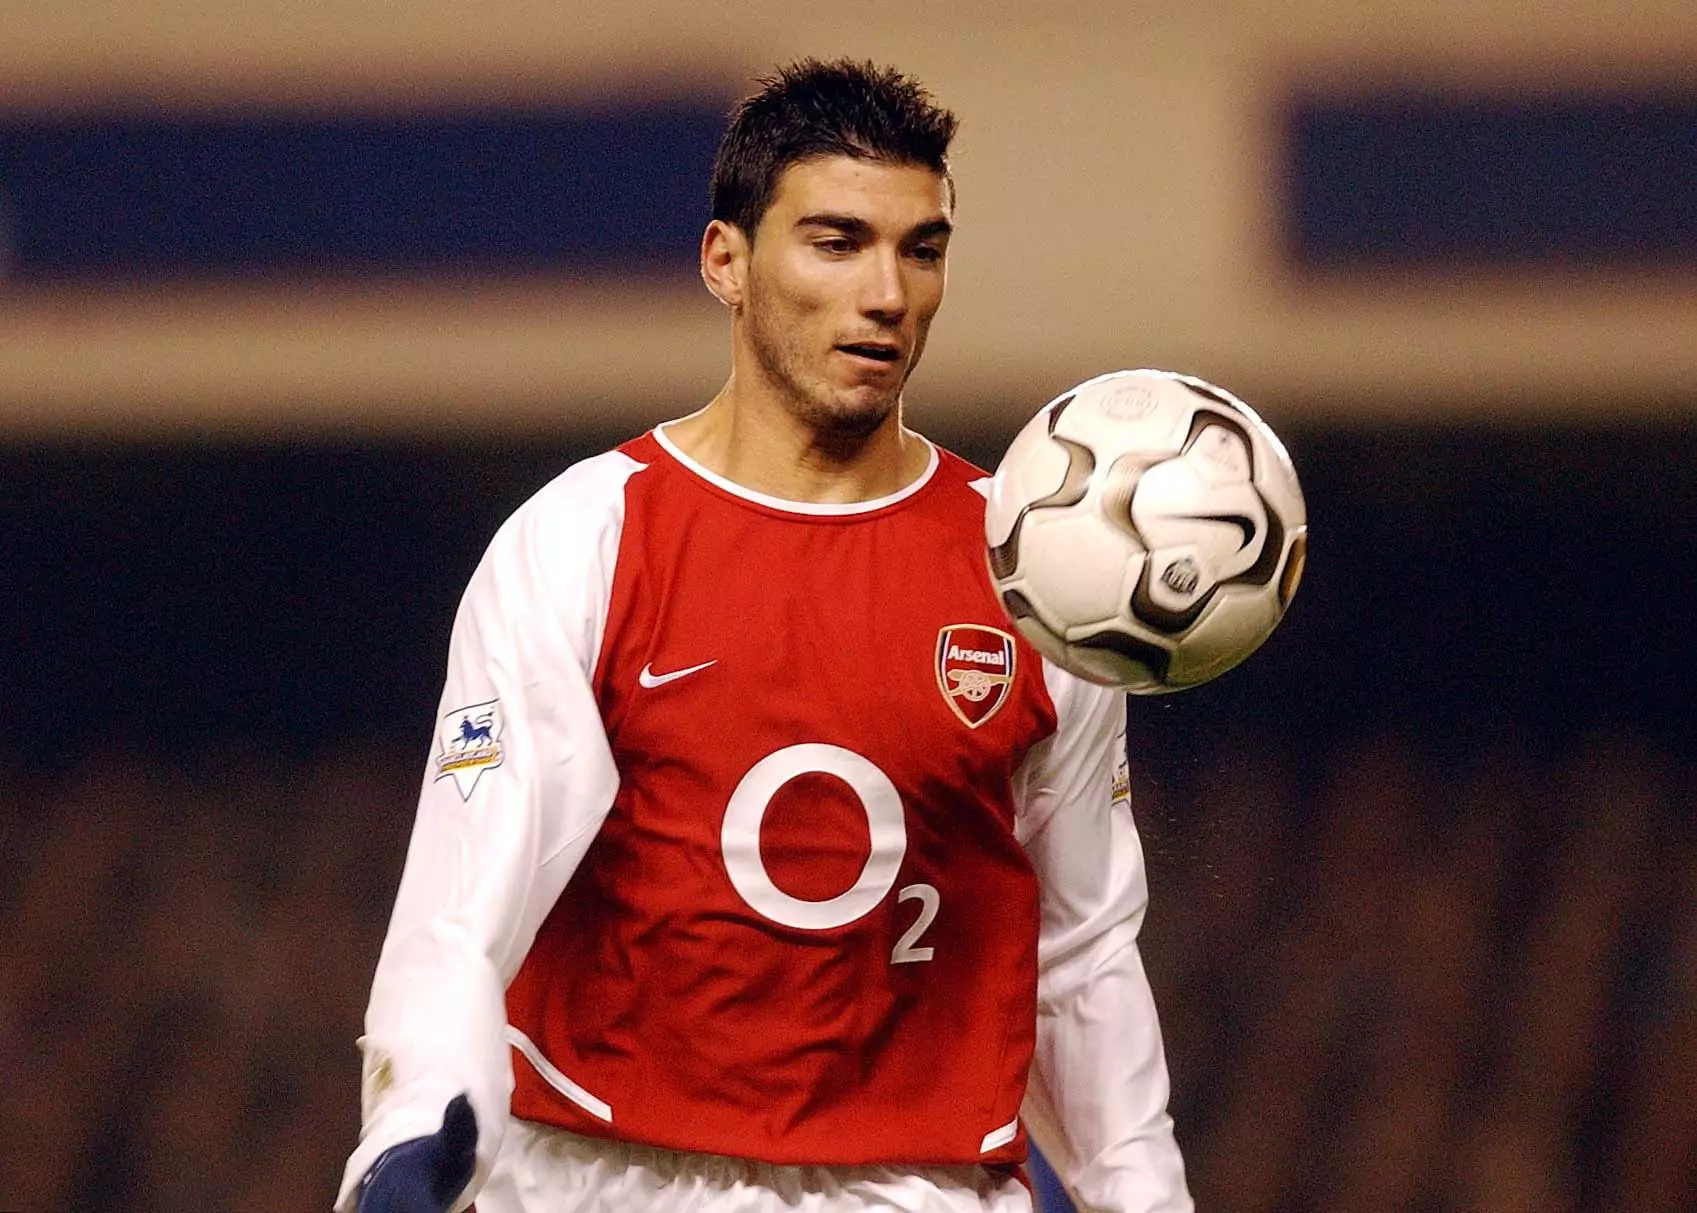 The gifted midfielder spent three years at Arsenal, winning the league and FA Cup.